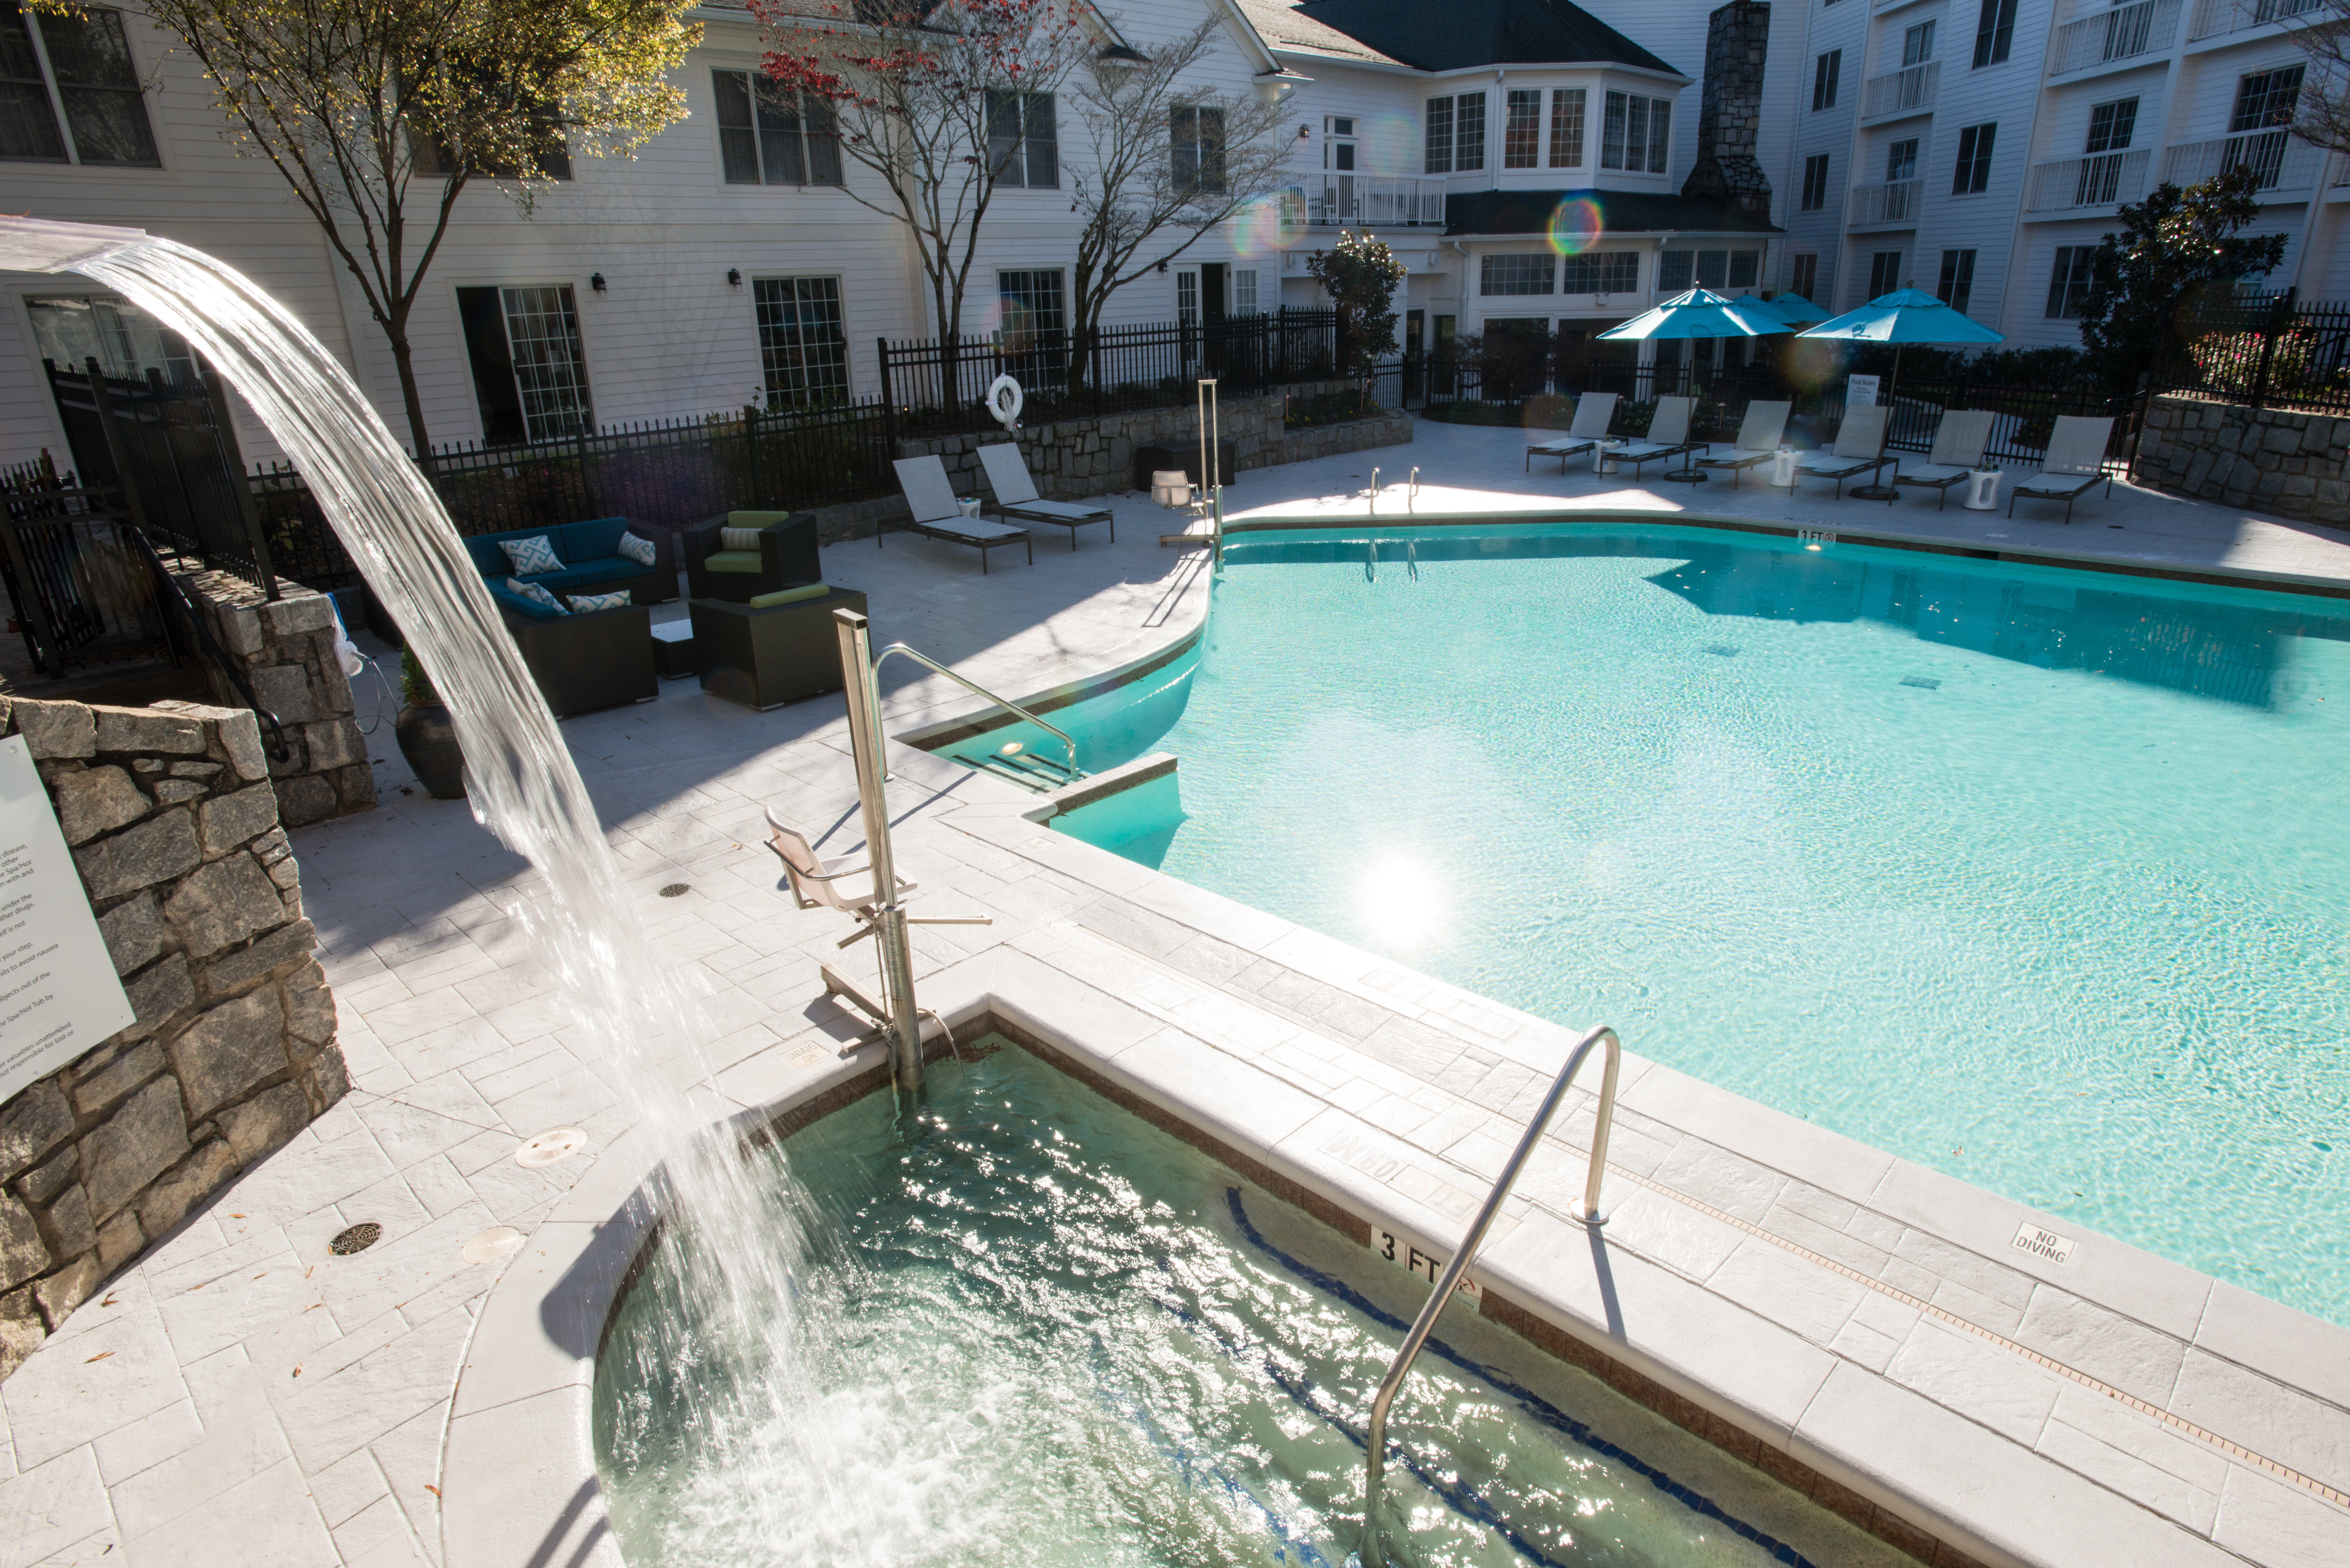 Have a morning or afternoon dip in our outdoor Swimming Pool